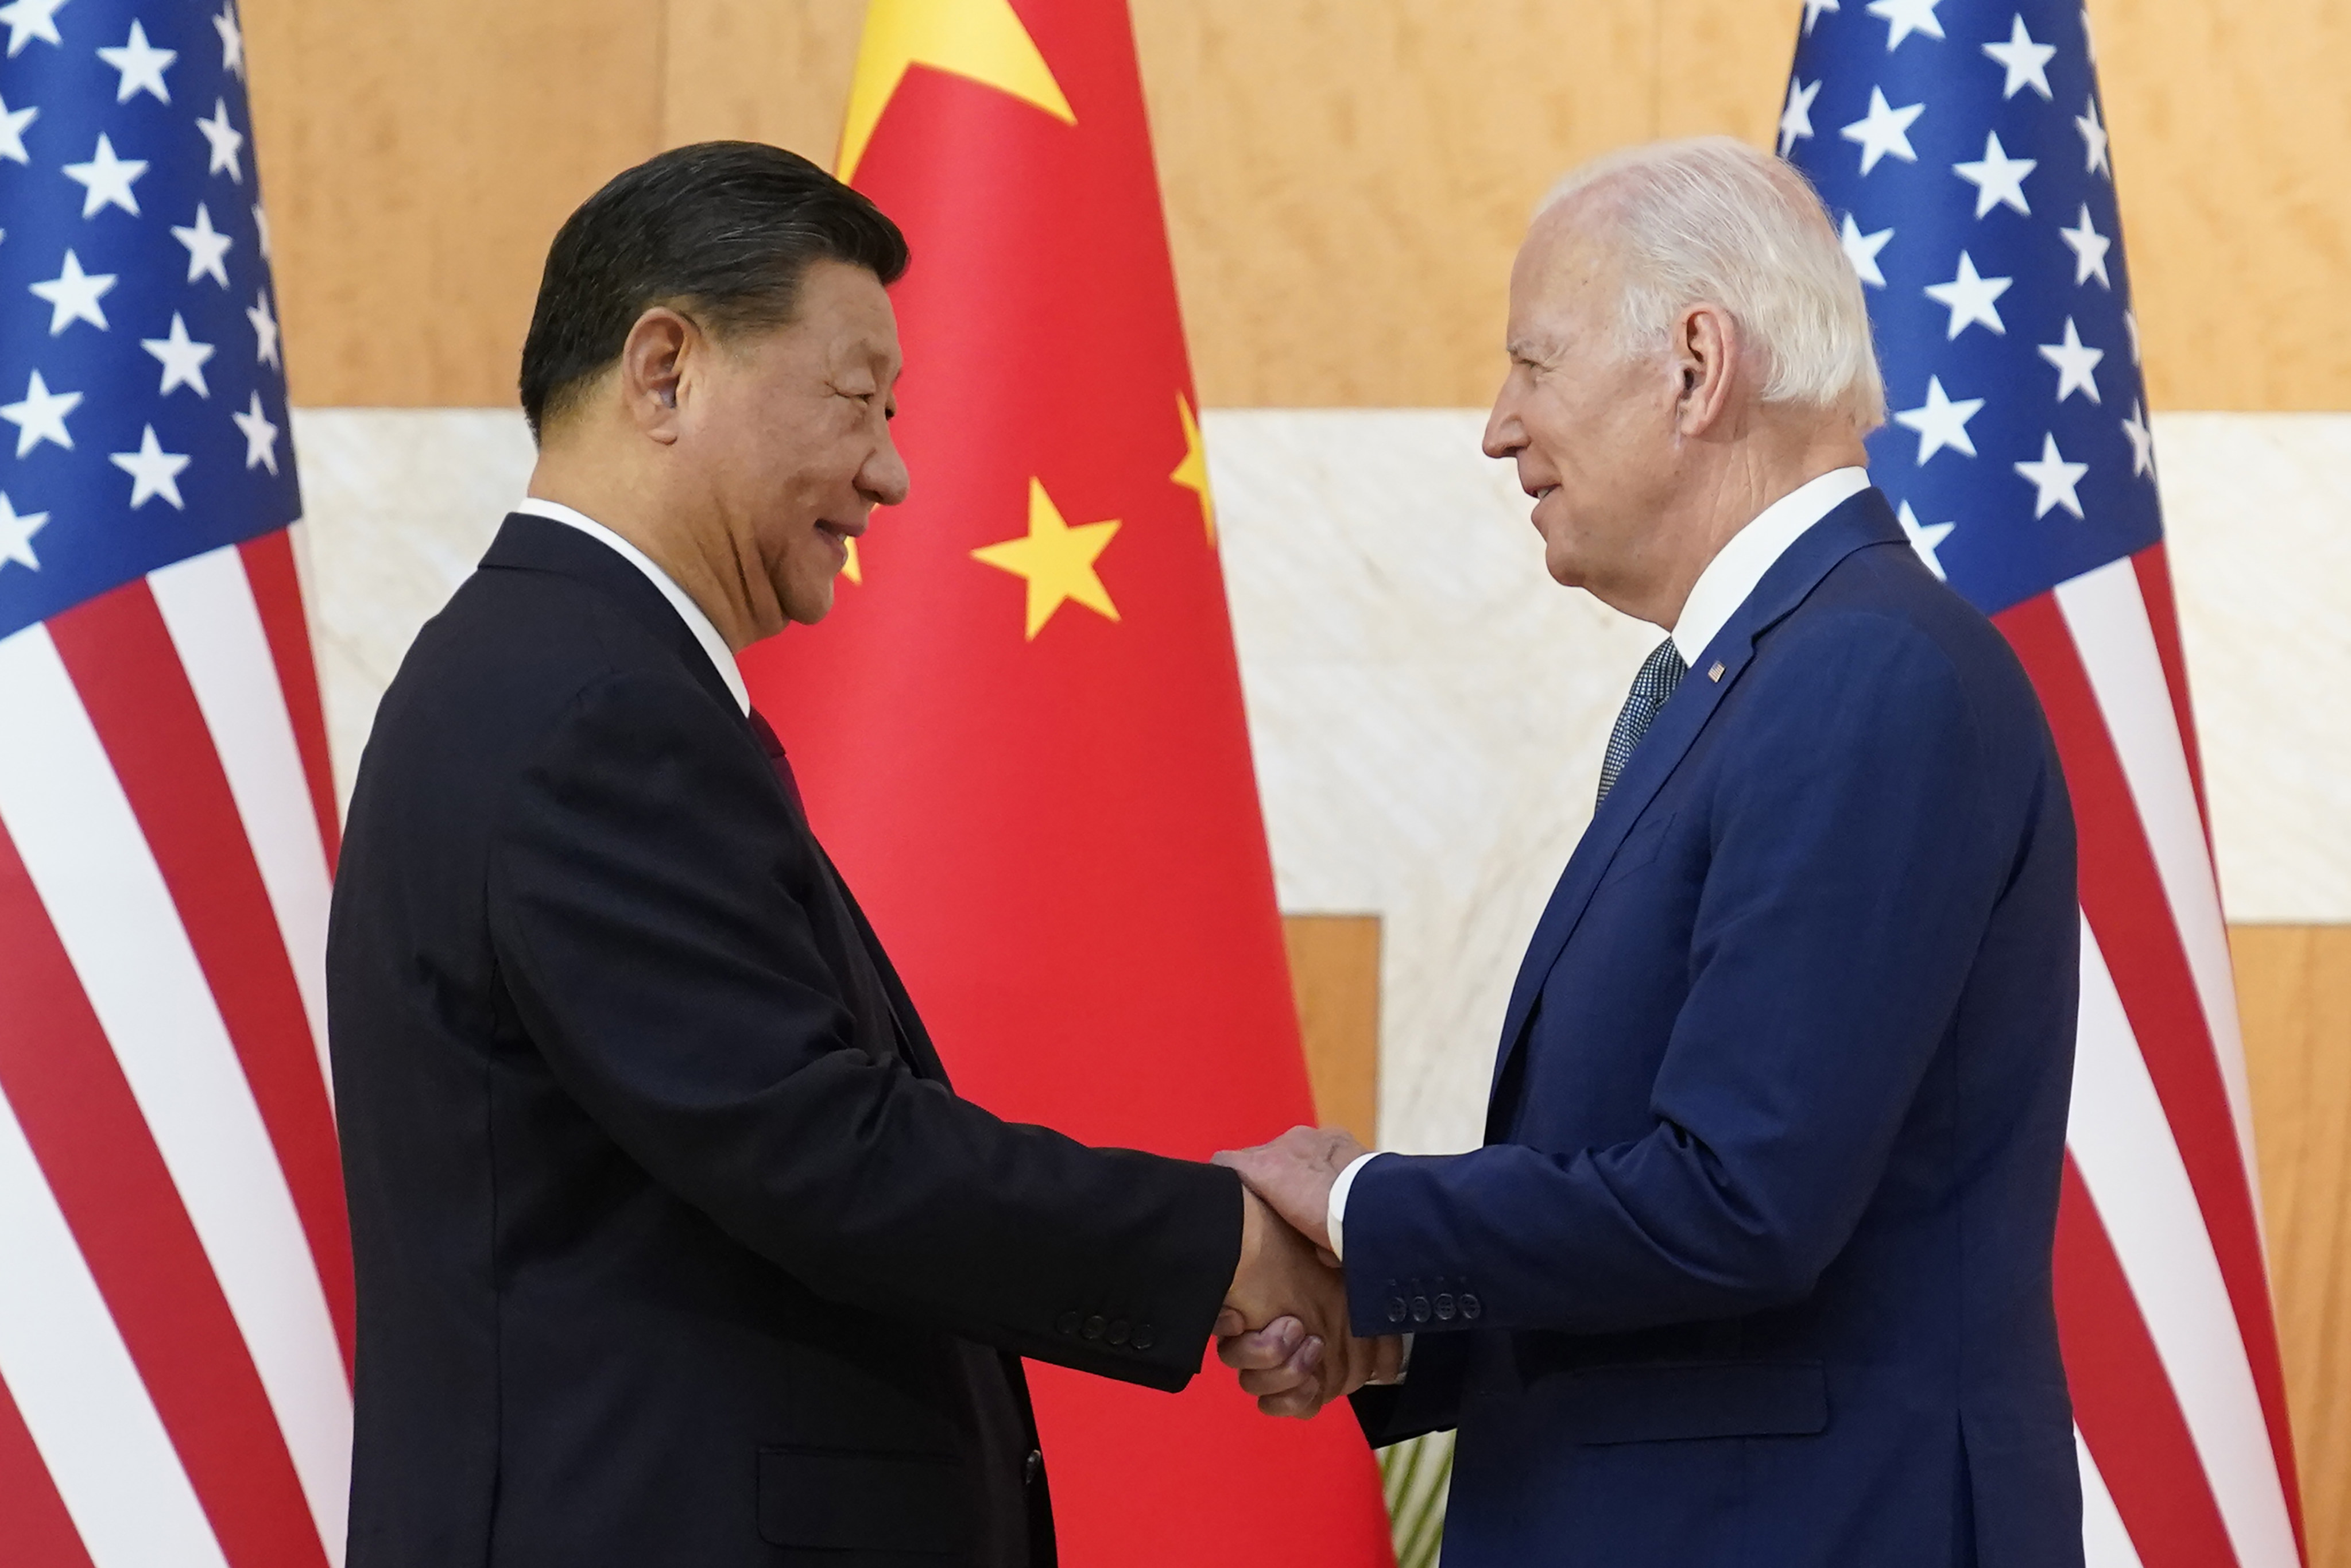 Chinese President Xi Jinping (right) has yet to confirm whether he will attend Apec in San Francisco next month. Photo: AP